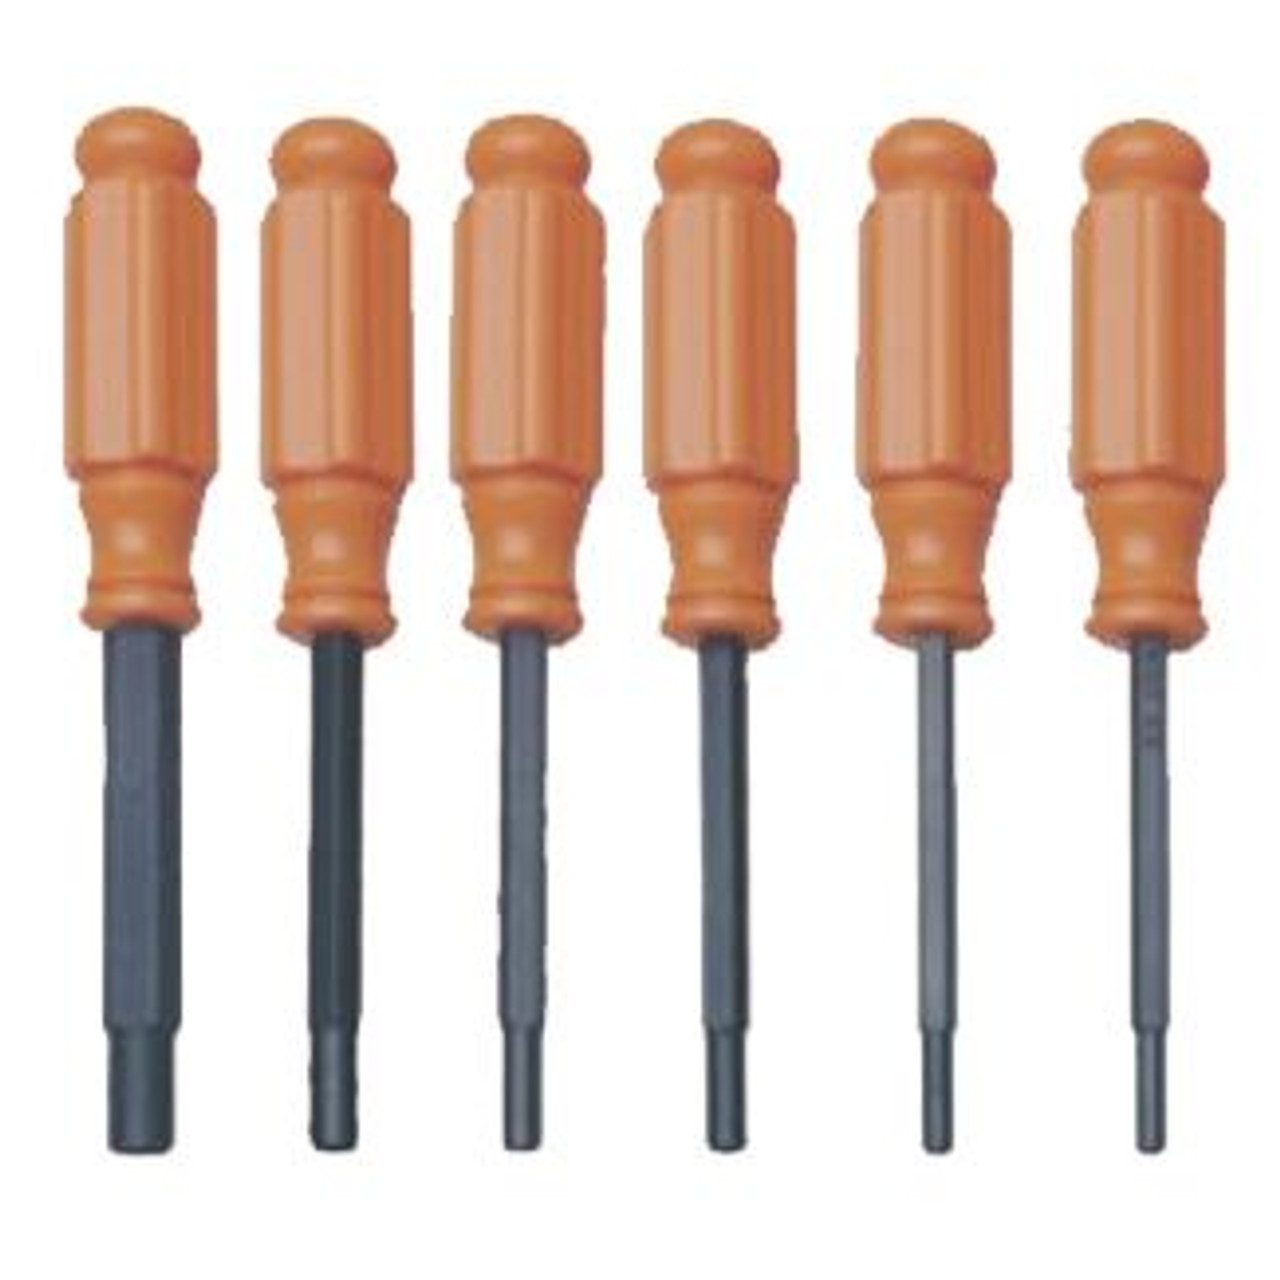 6 pc Torx Inverted Screwdriver Set (Discontinued by Mfg.)